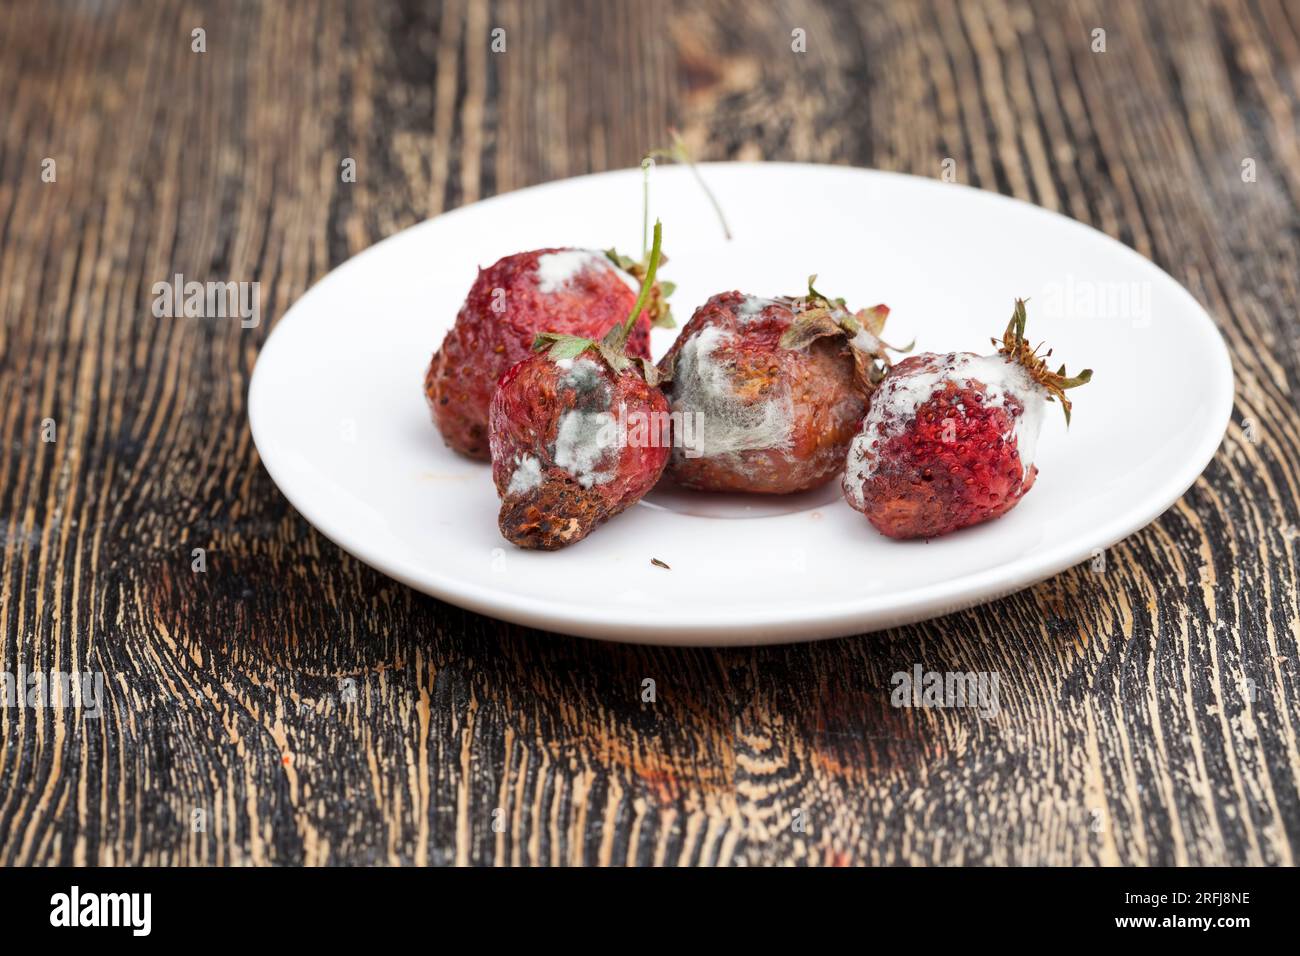 spoiled red strawberries covered with mold and rot, moldy rotting red strawberries Stock Photo